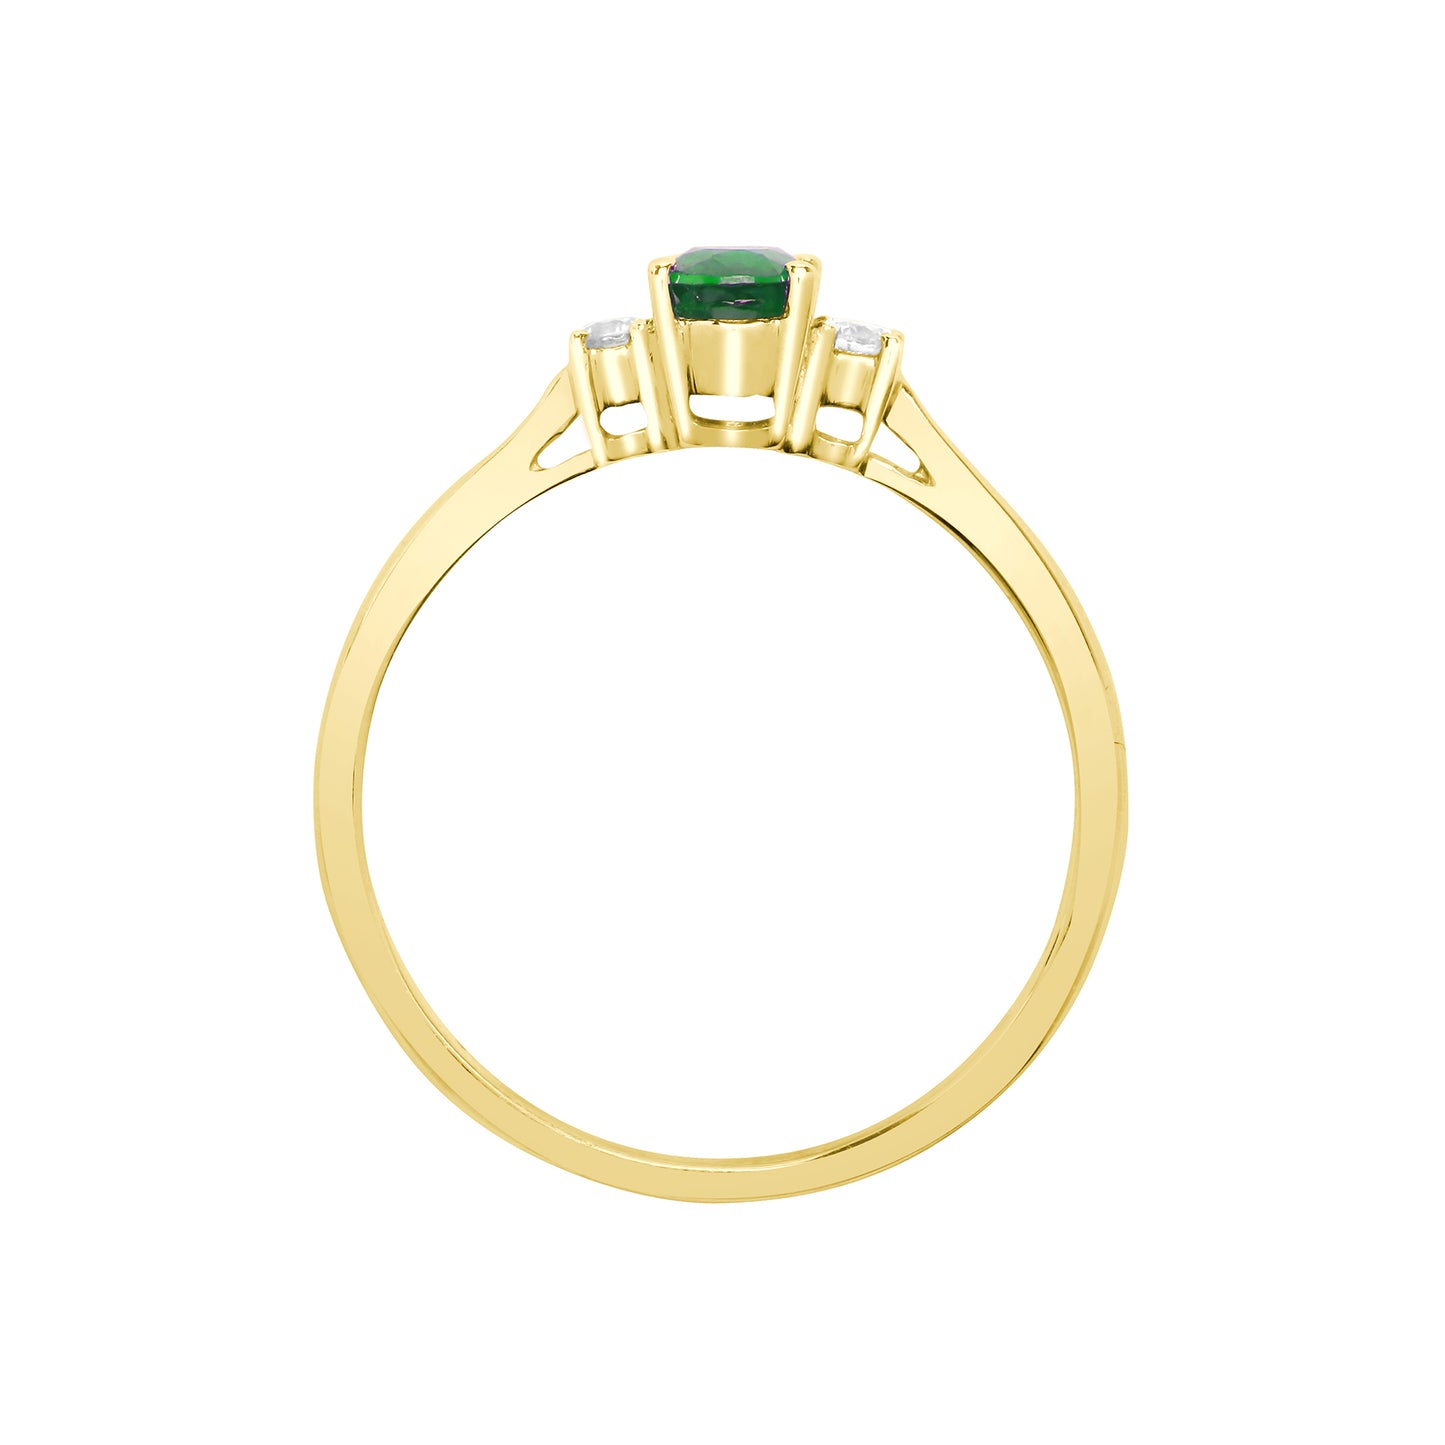 18ct Gold  Diamond Green Emerald Trilogy Engagement Ring 6mm - 18R632